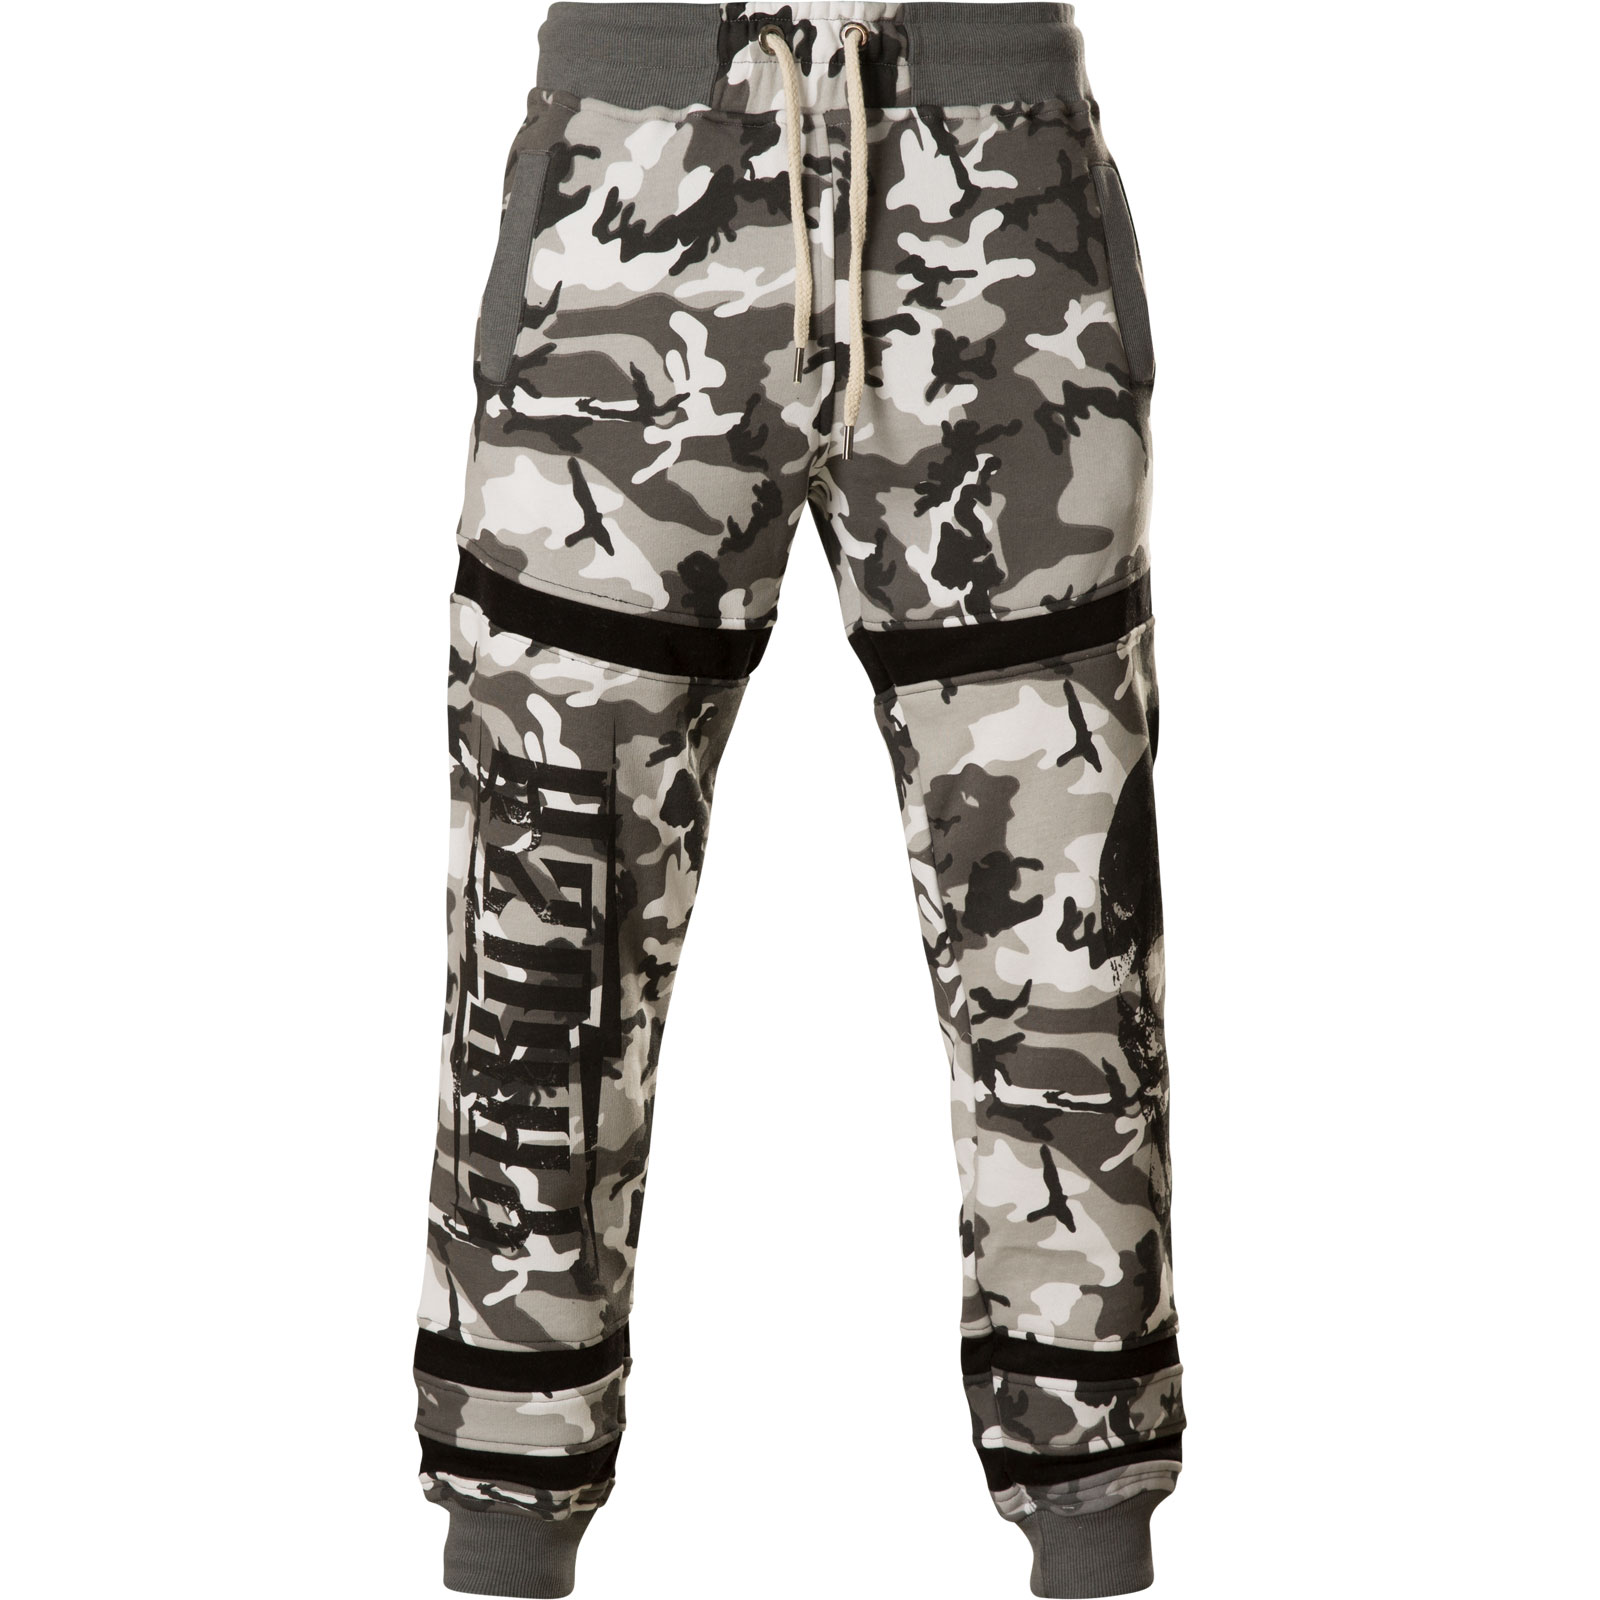 Yakuza Skull Jogger JOB-11028 Joggers with embroidered patches